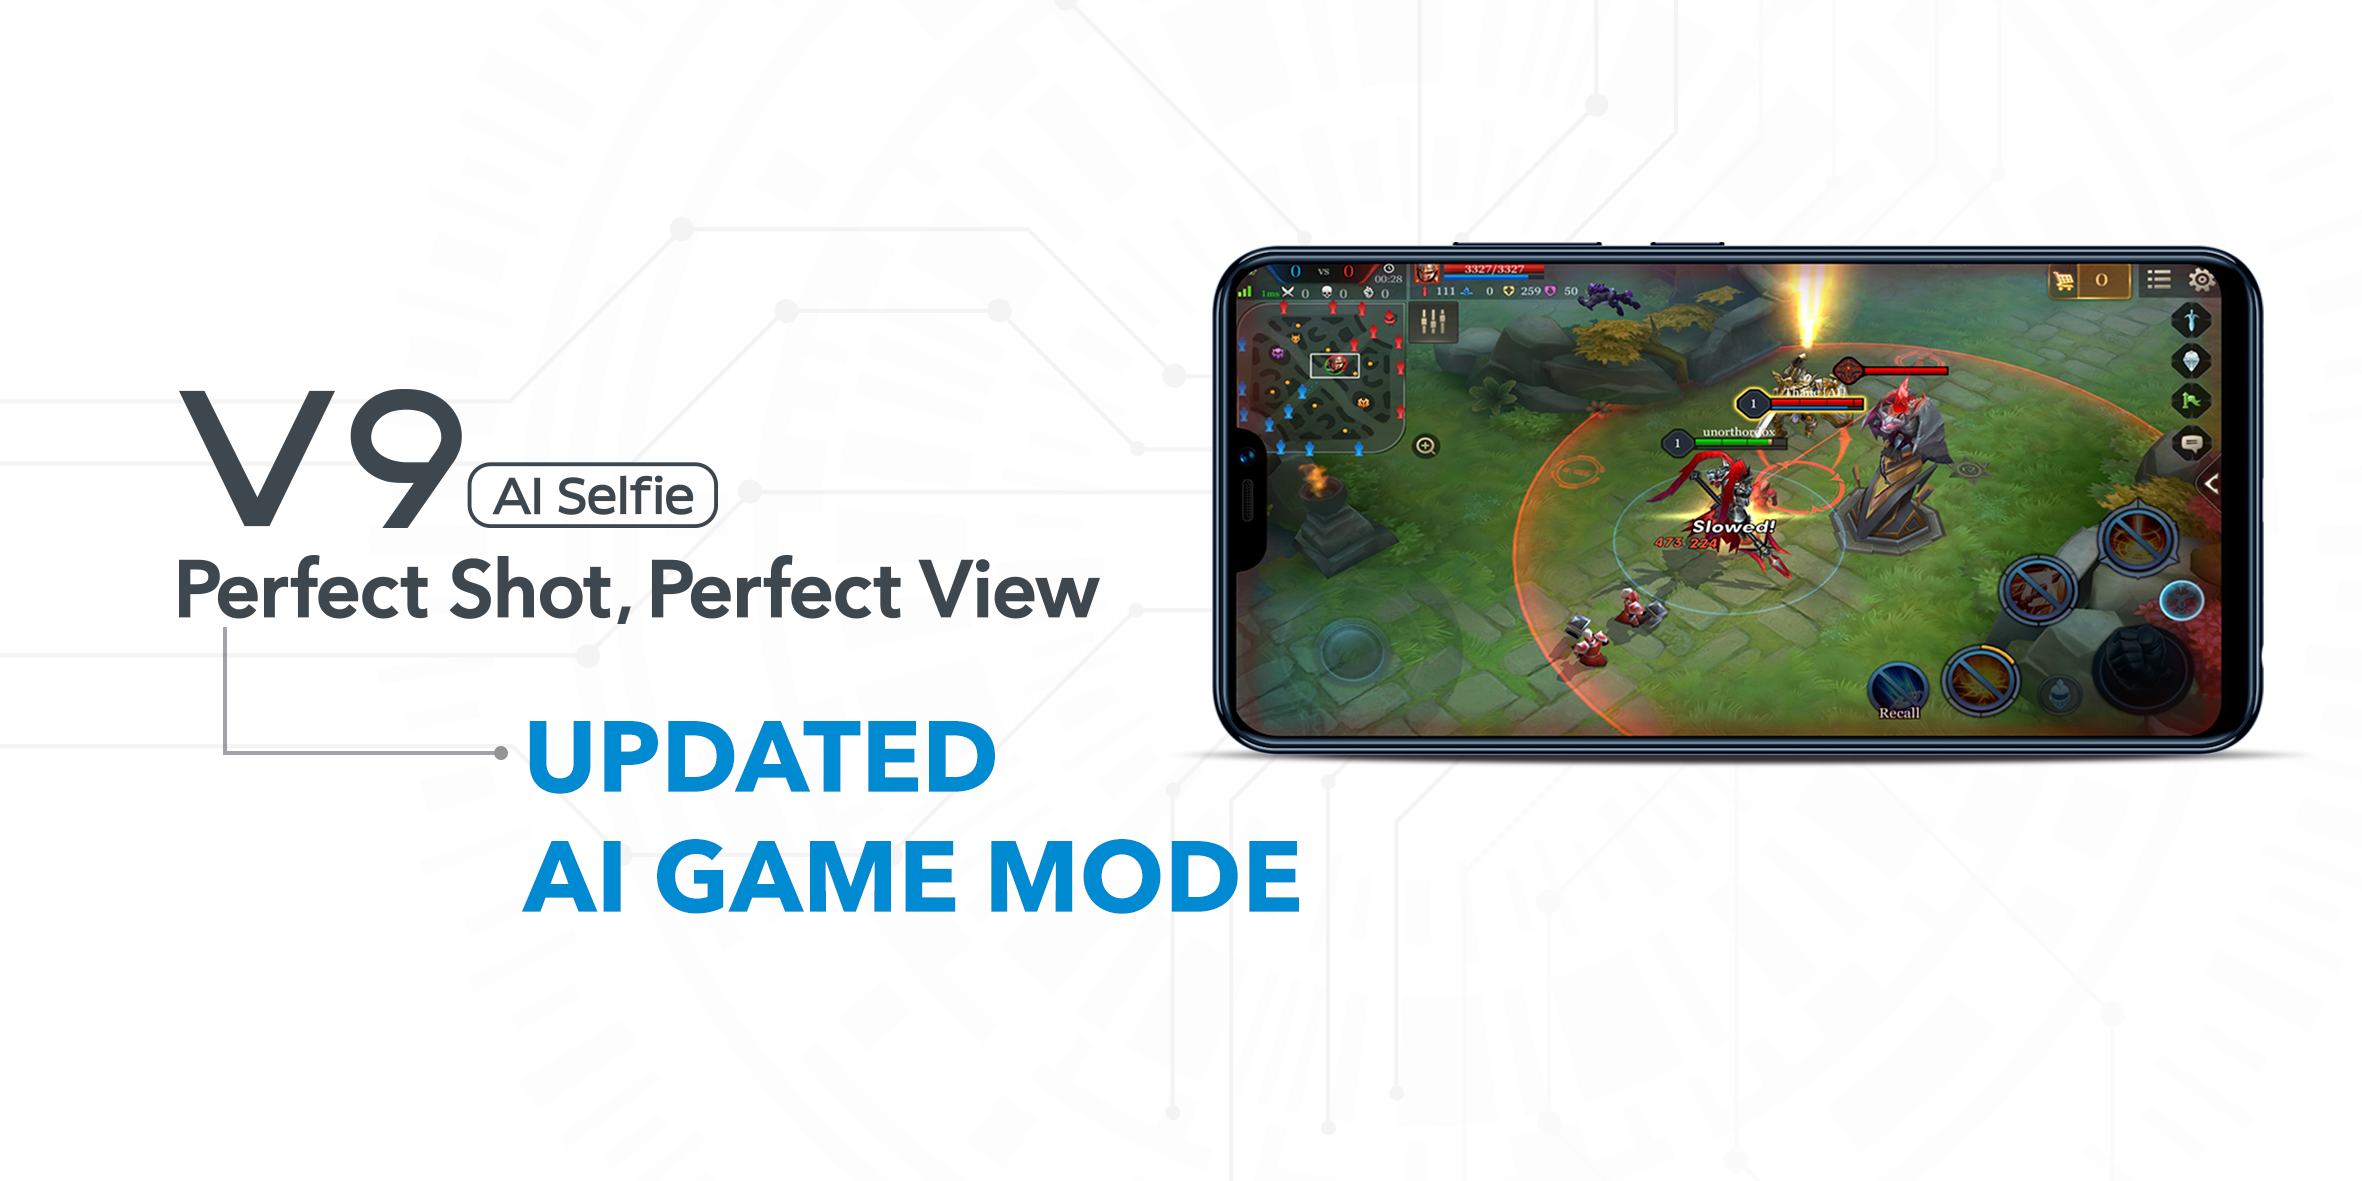 An updated A.I. Game Mode is also inside the vivo V9